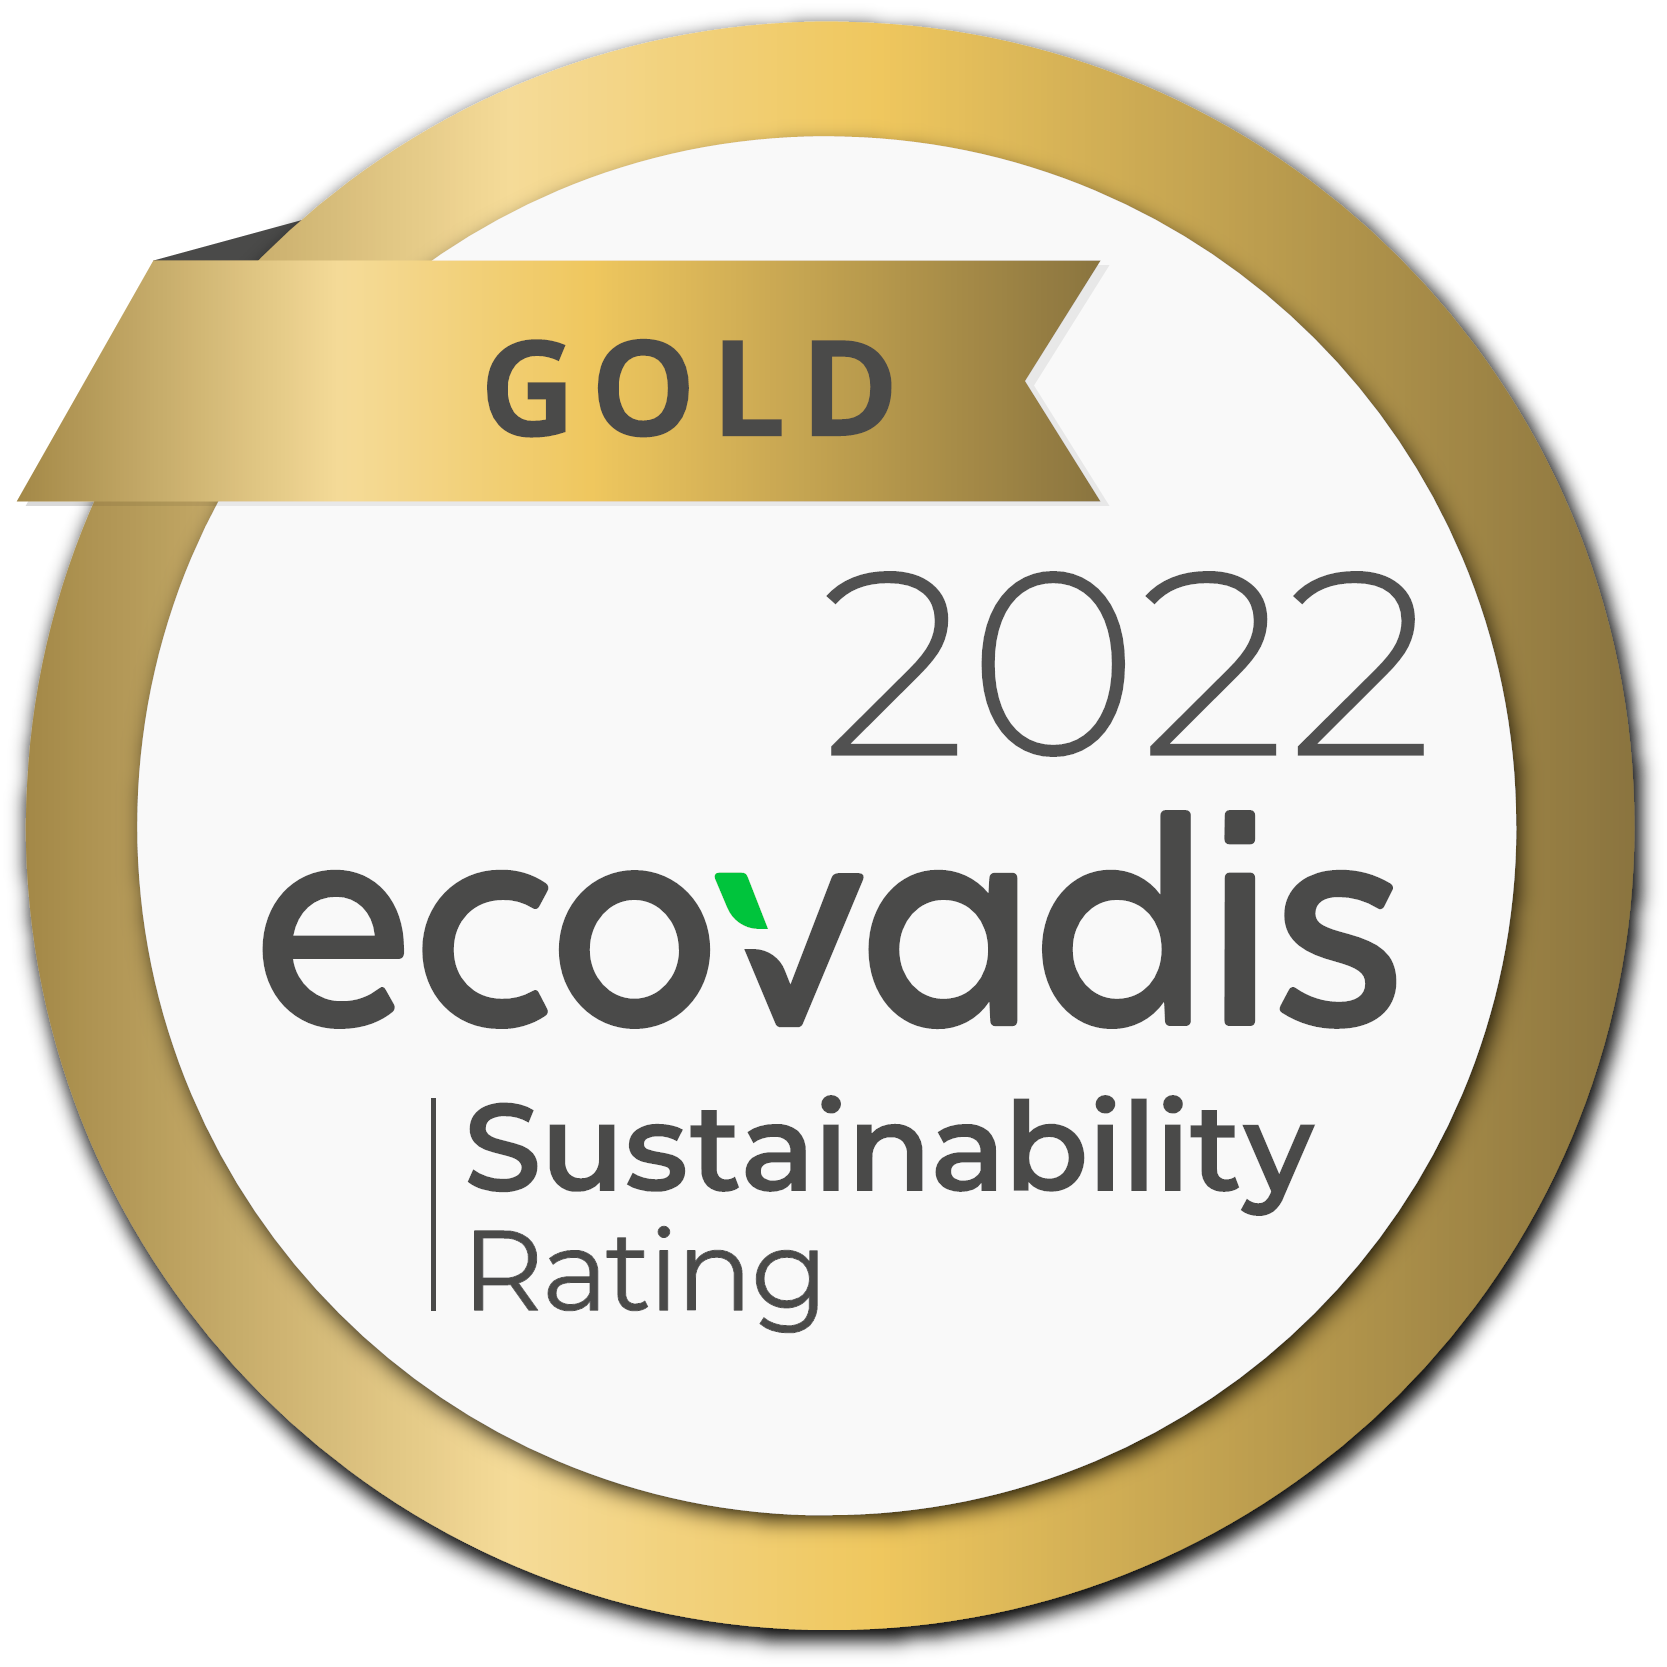 ALD Automotive Turkey was awarded with the Gold Medal by EcoVadis